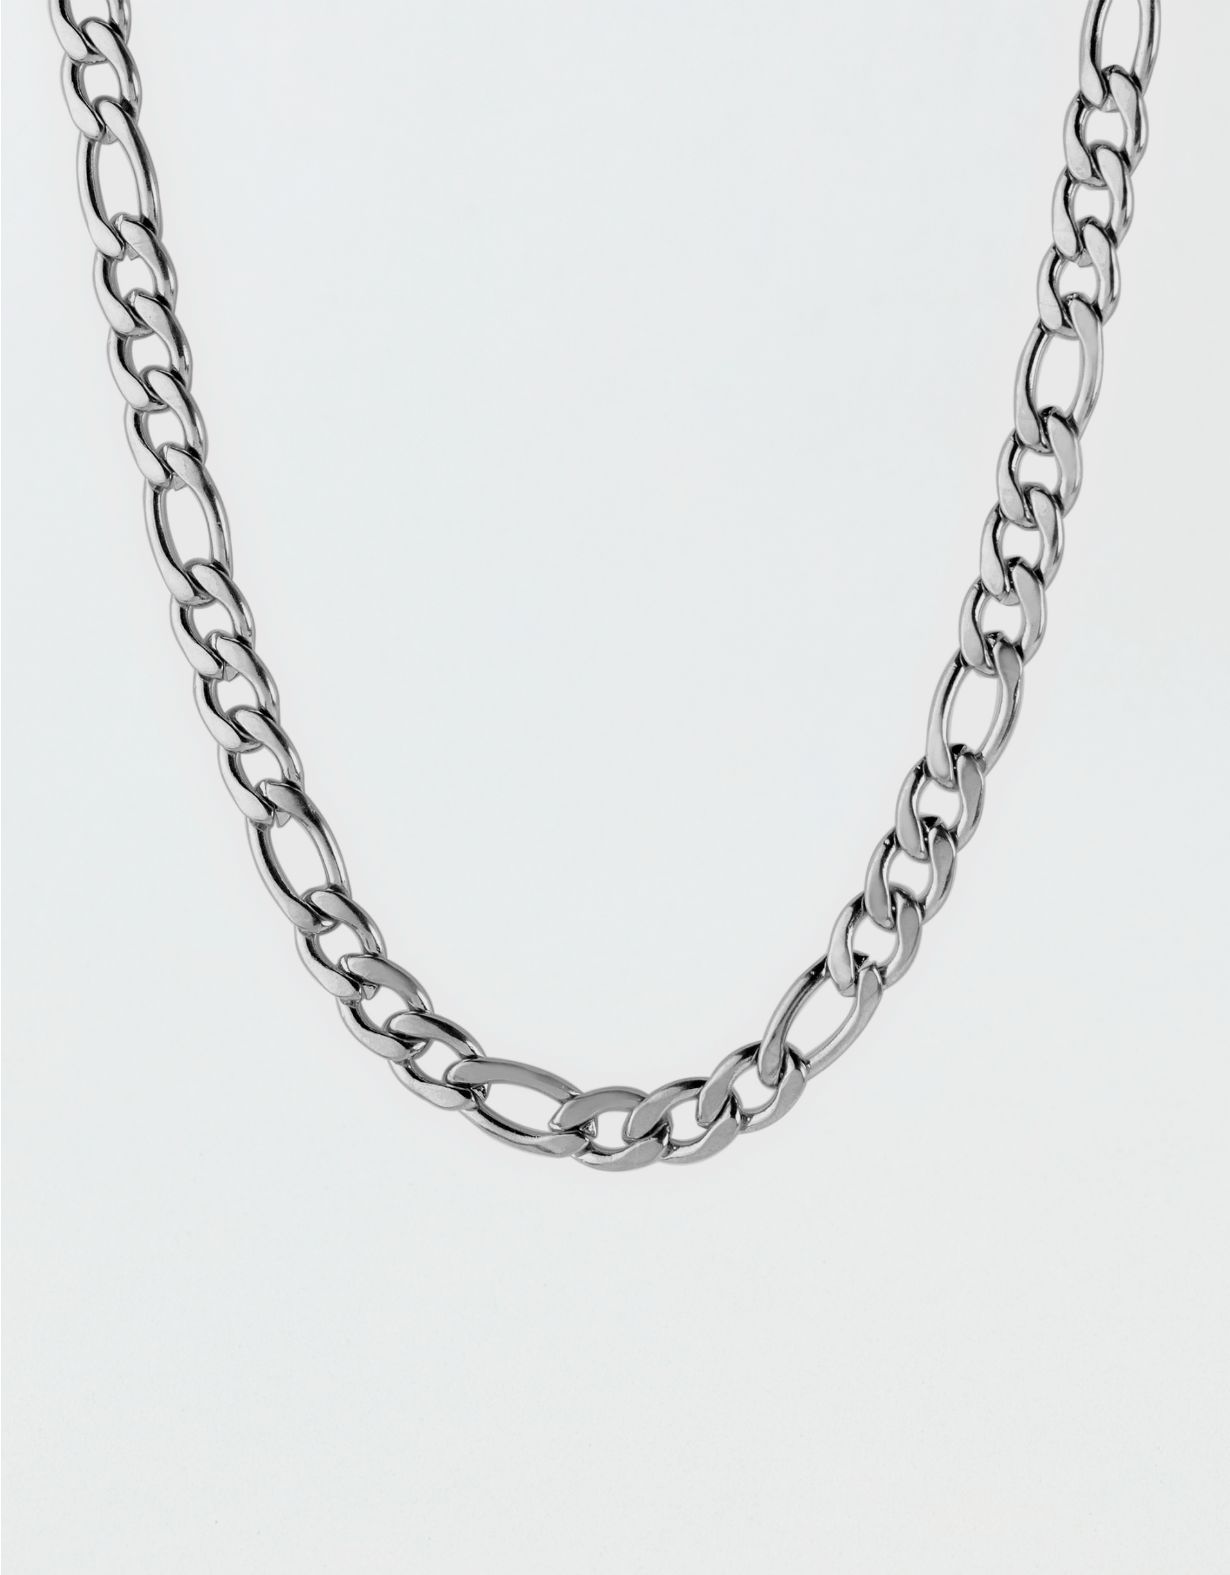 West Coast Jewelry Polished Stainless Steel Figaro Chain Necklace